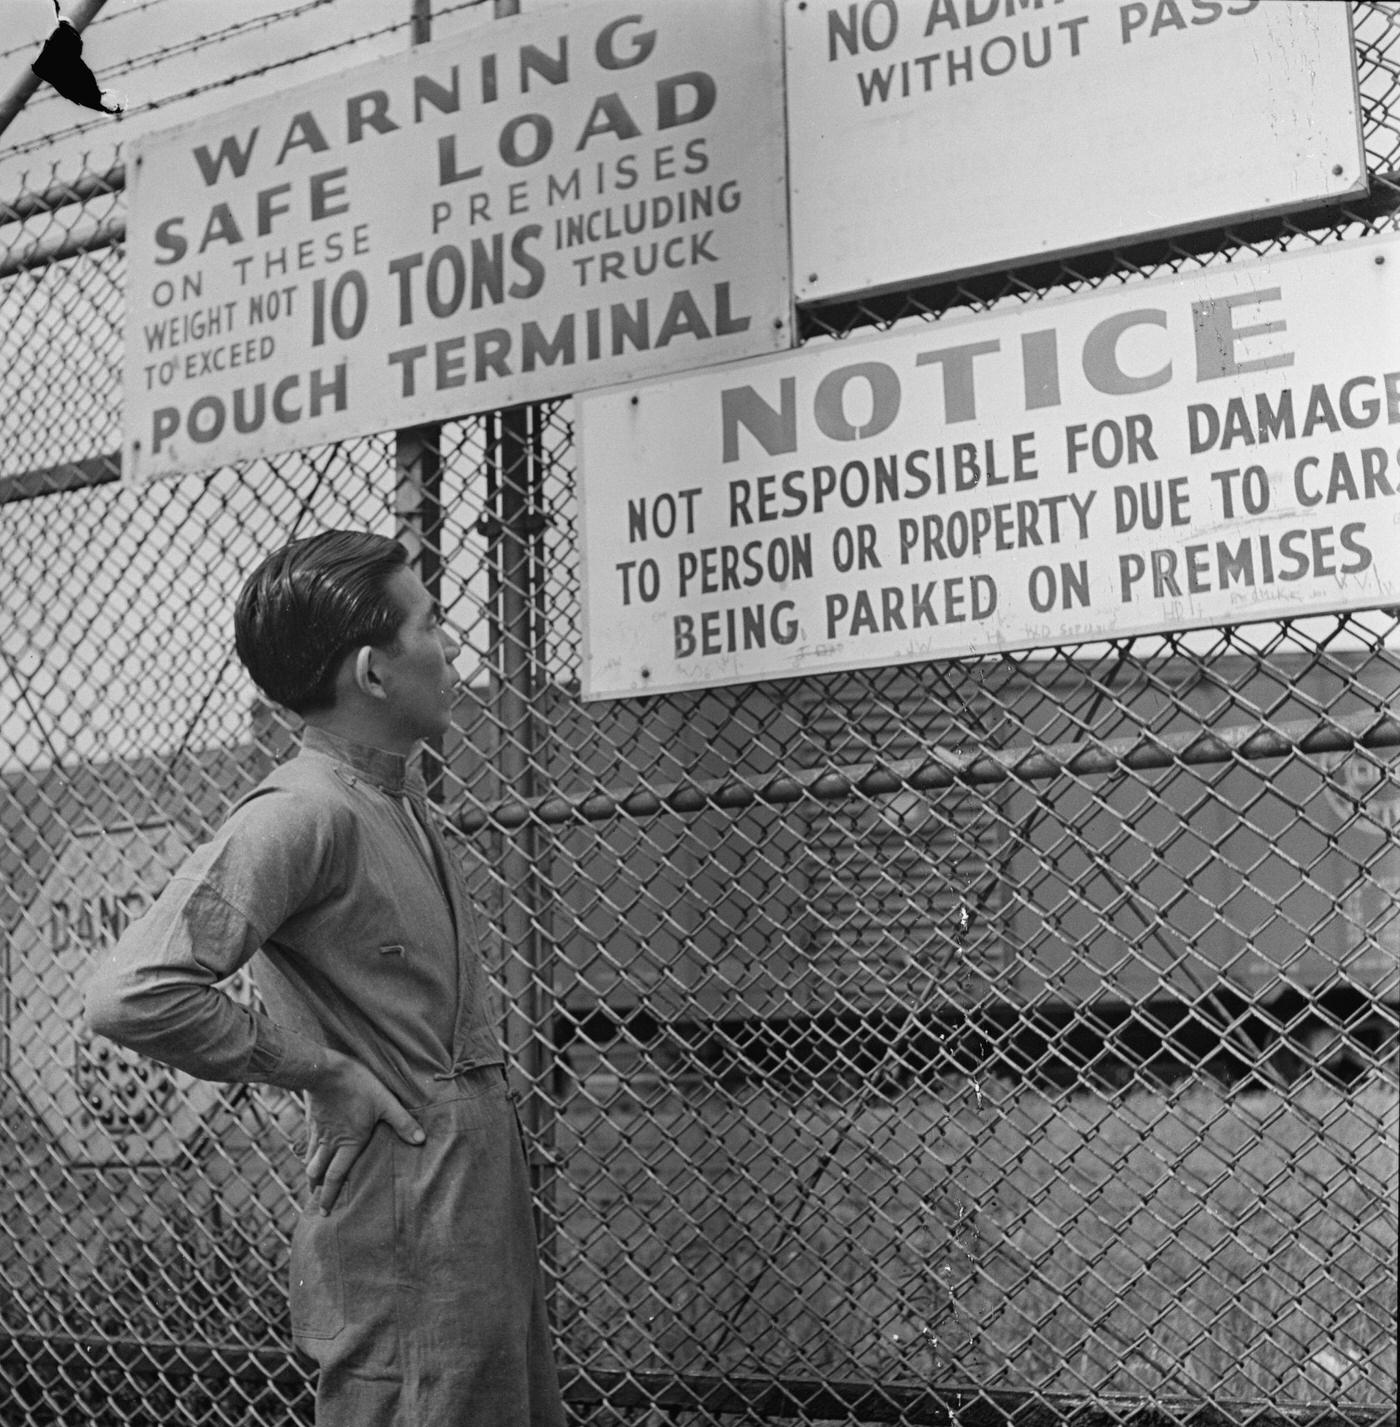 Chinese Mariner Lee Ah Ding Reading Dock Gate Notices At Pouch Terminal, Staten Island, September 1942.